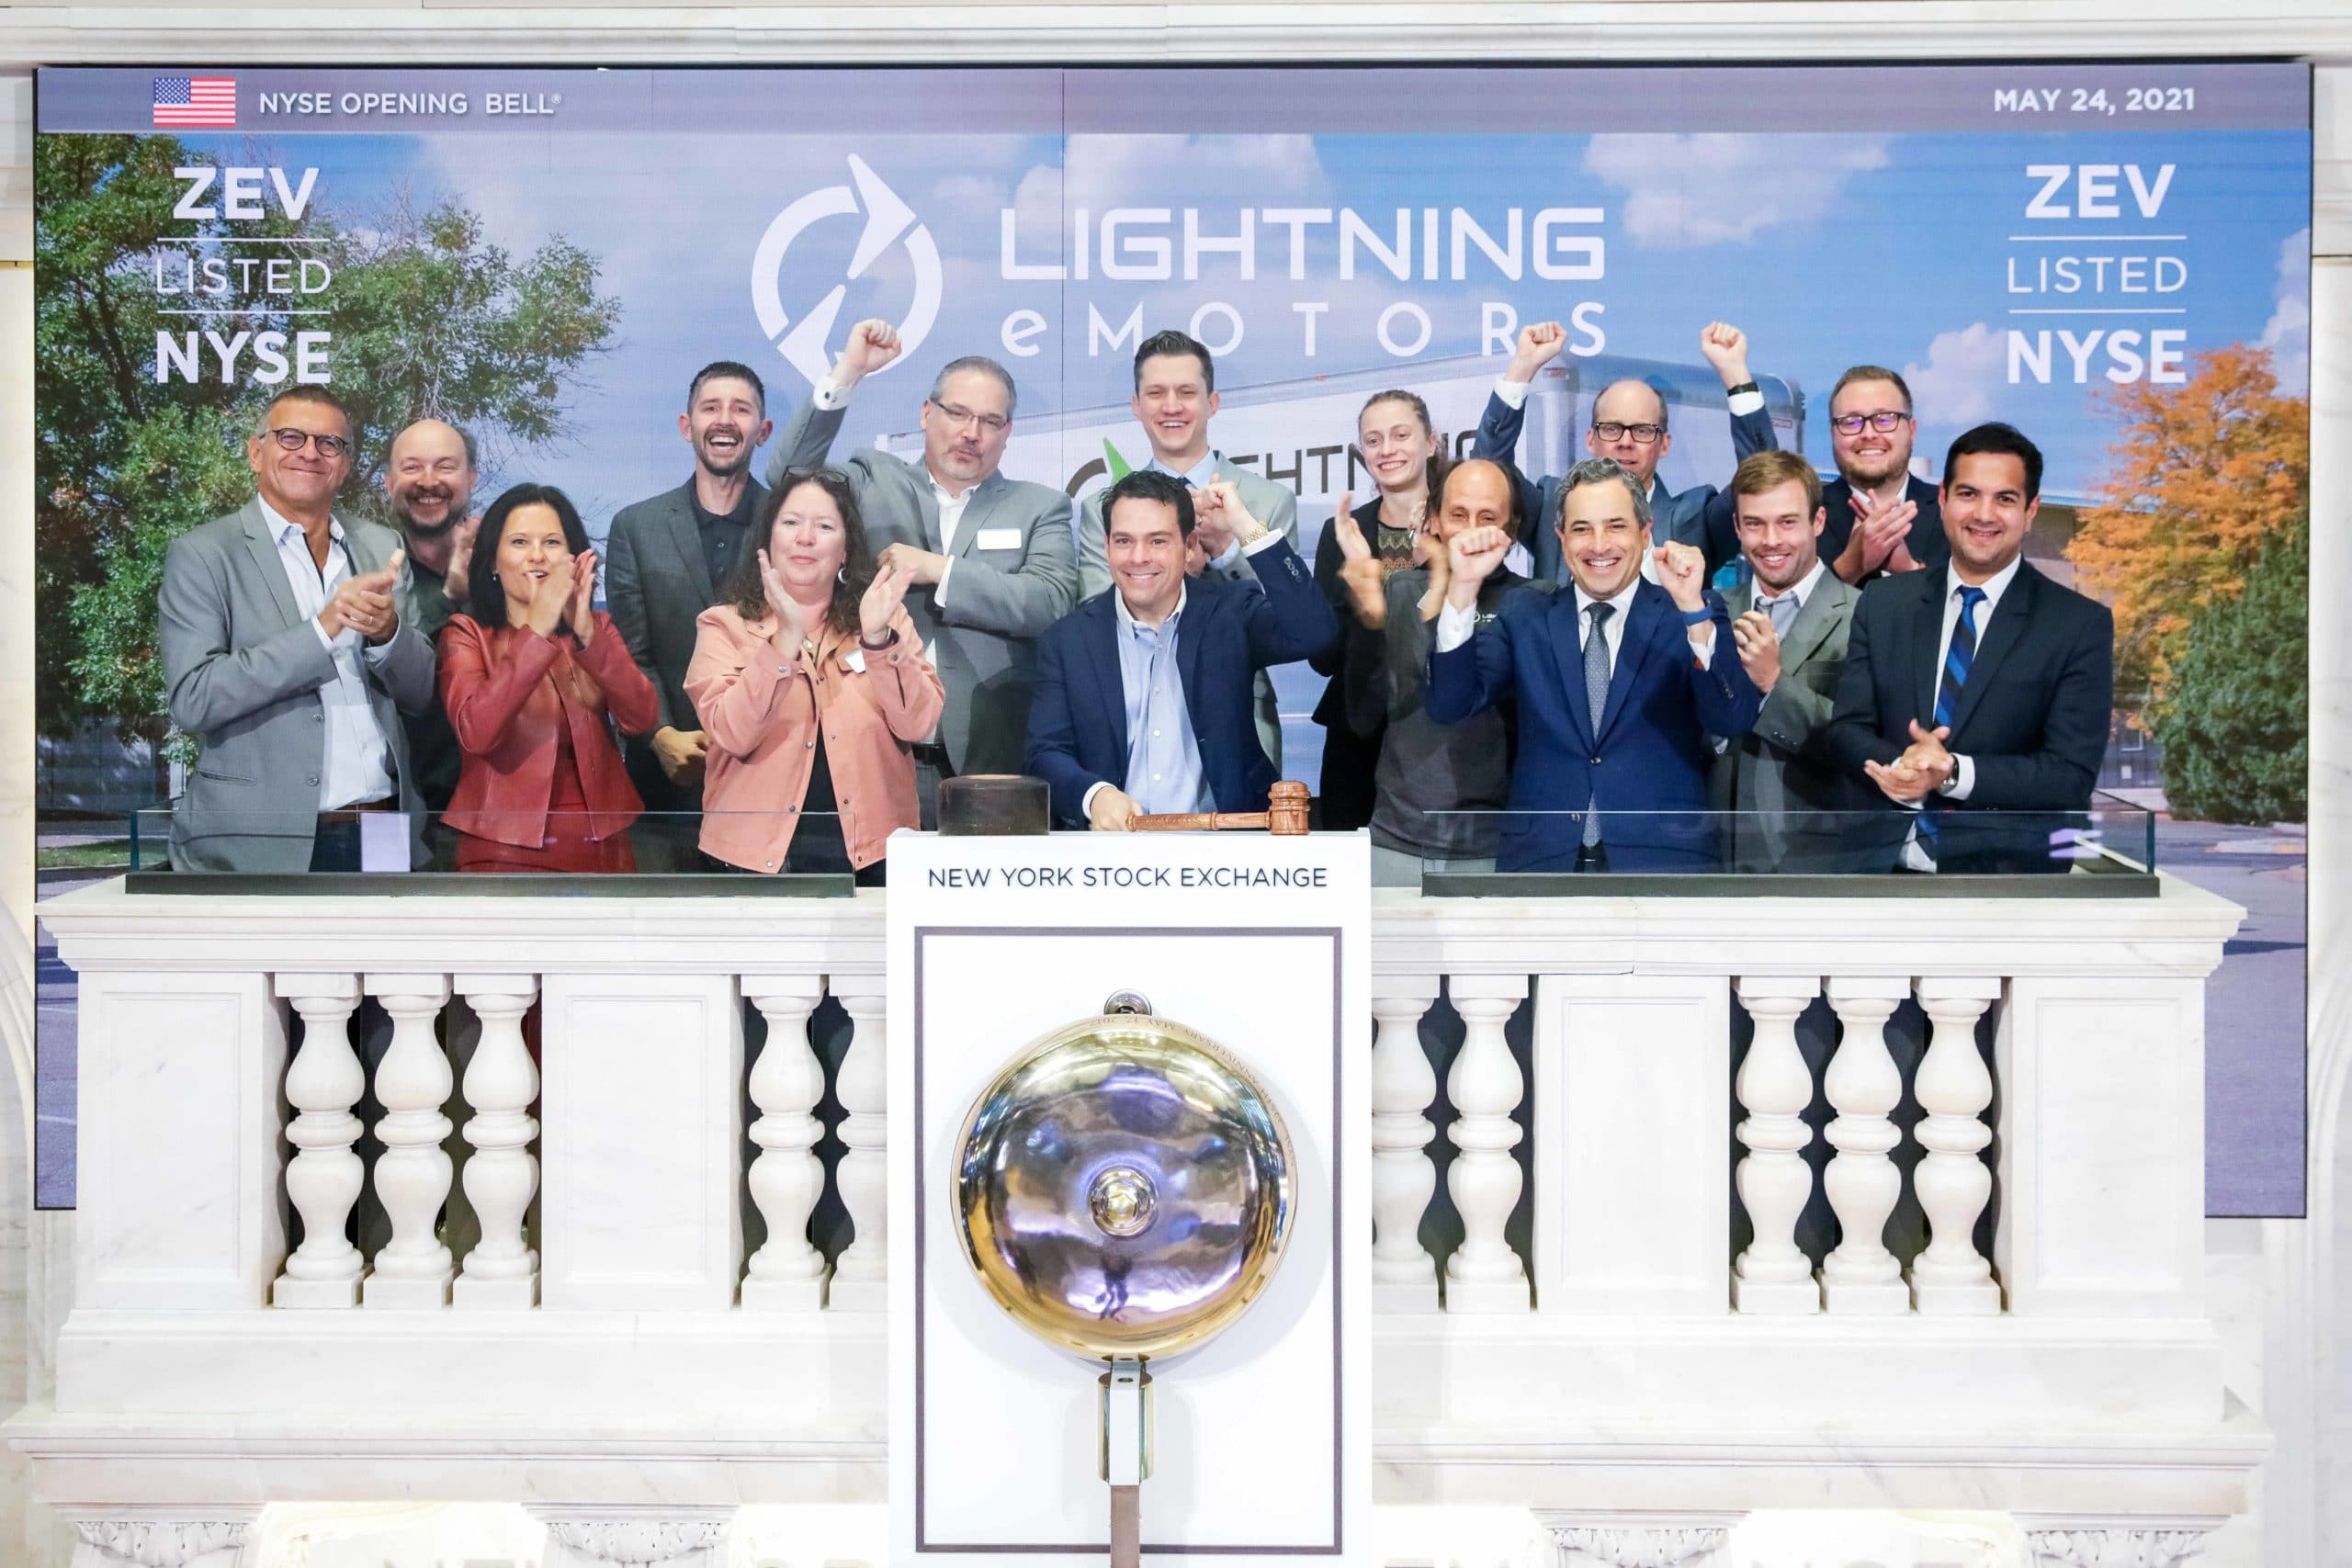 Lightning eMotors’ CEO and Leadership Team Ring Opening Bell at New York Stock Exchange NYSE